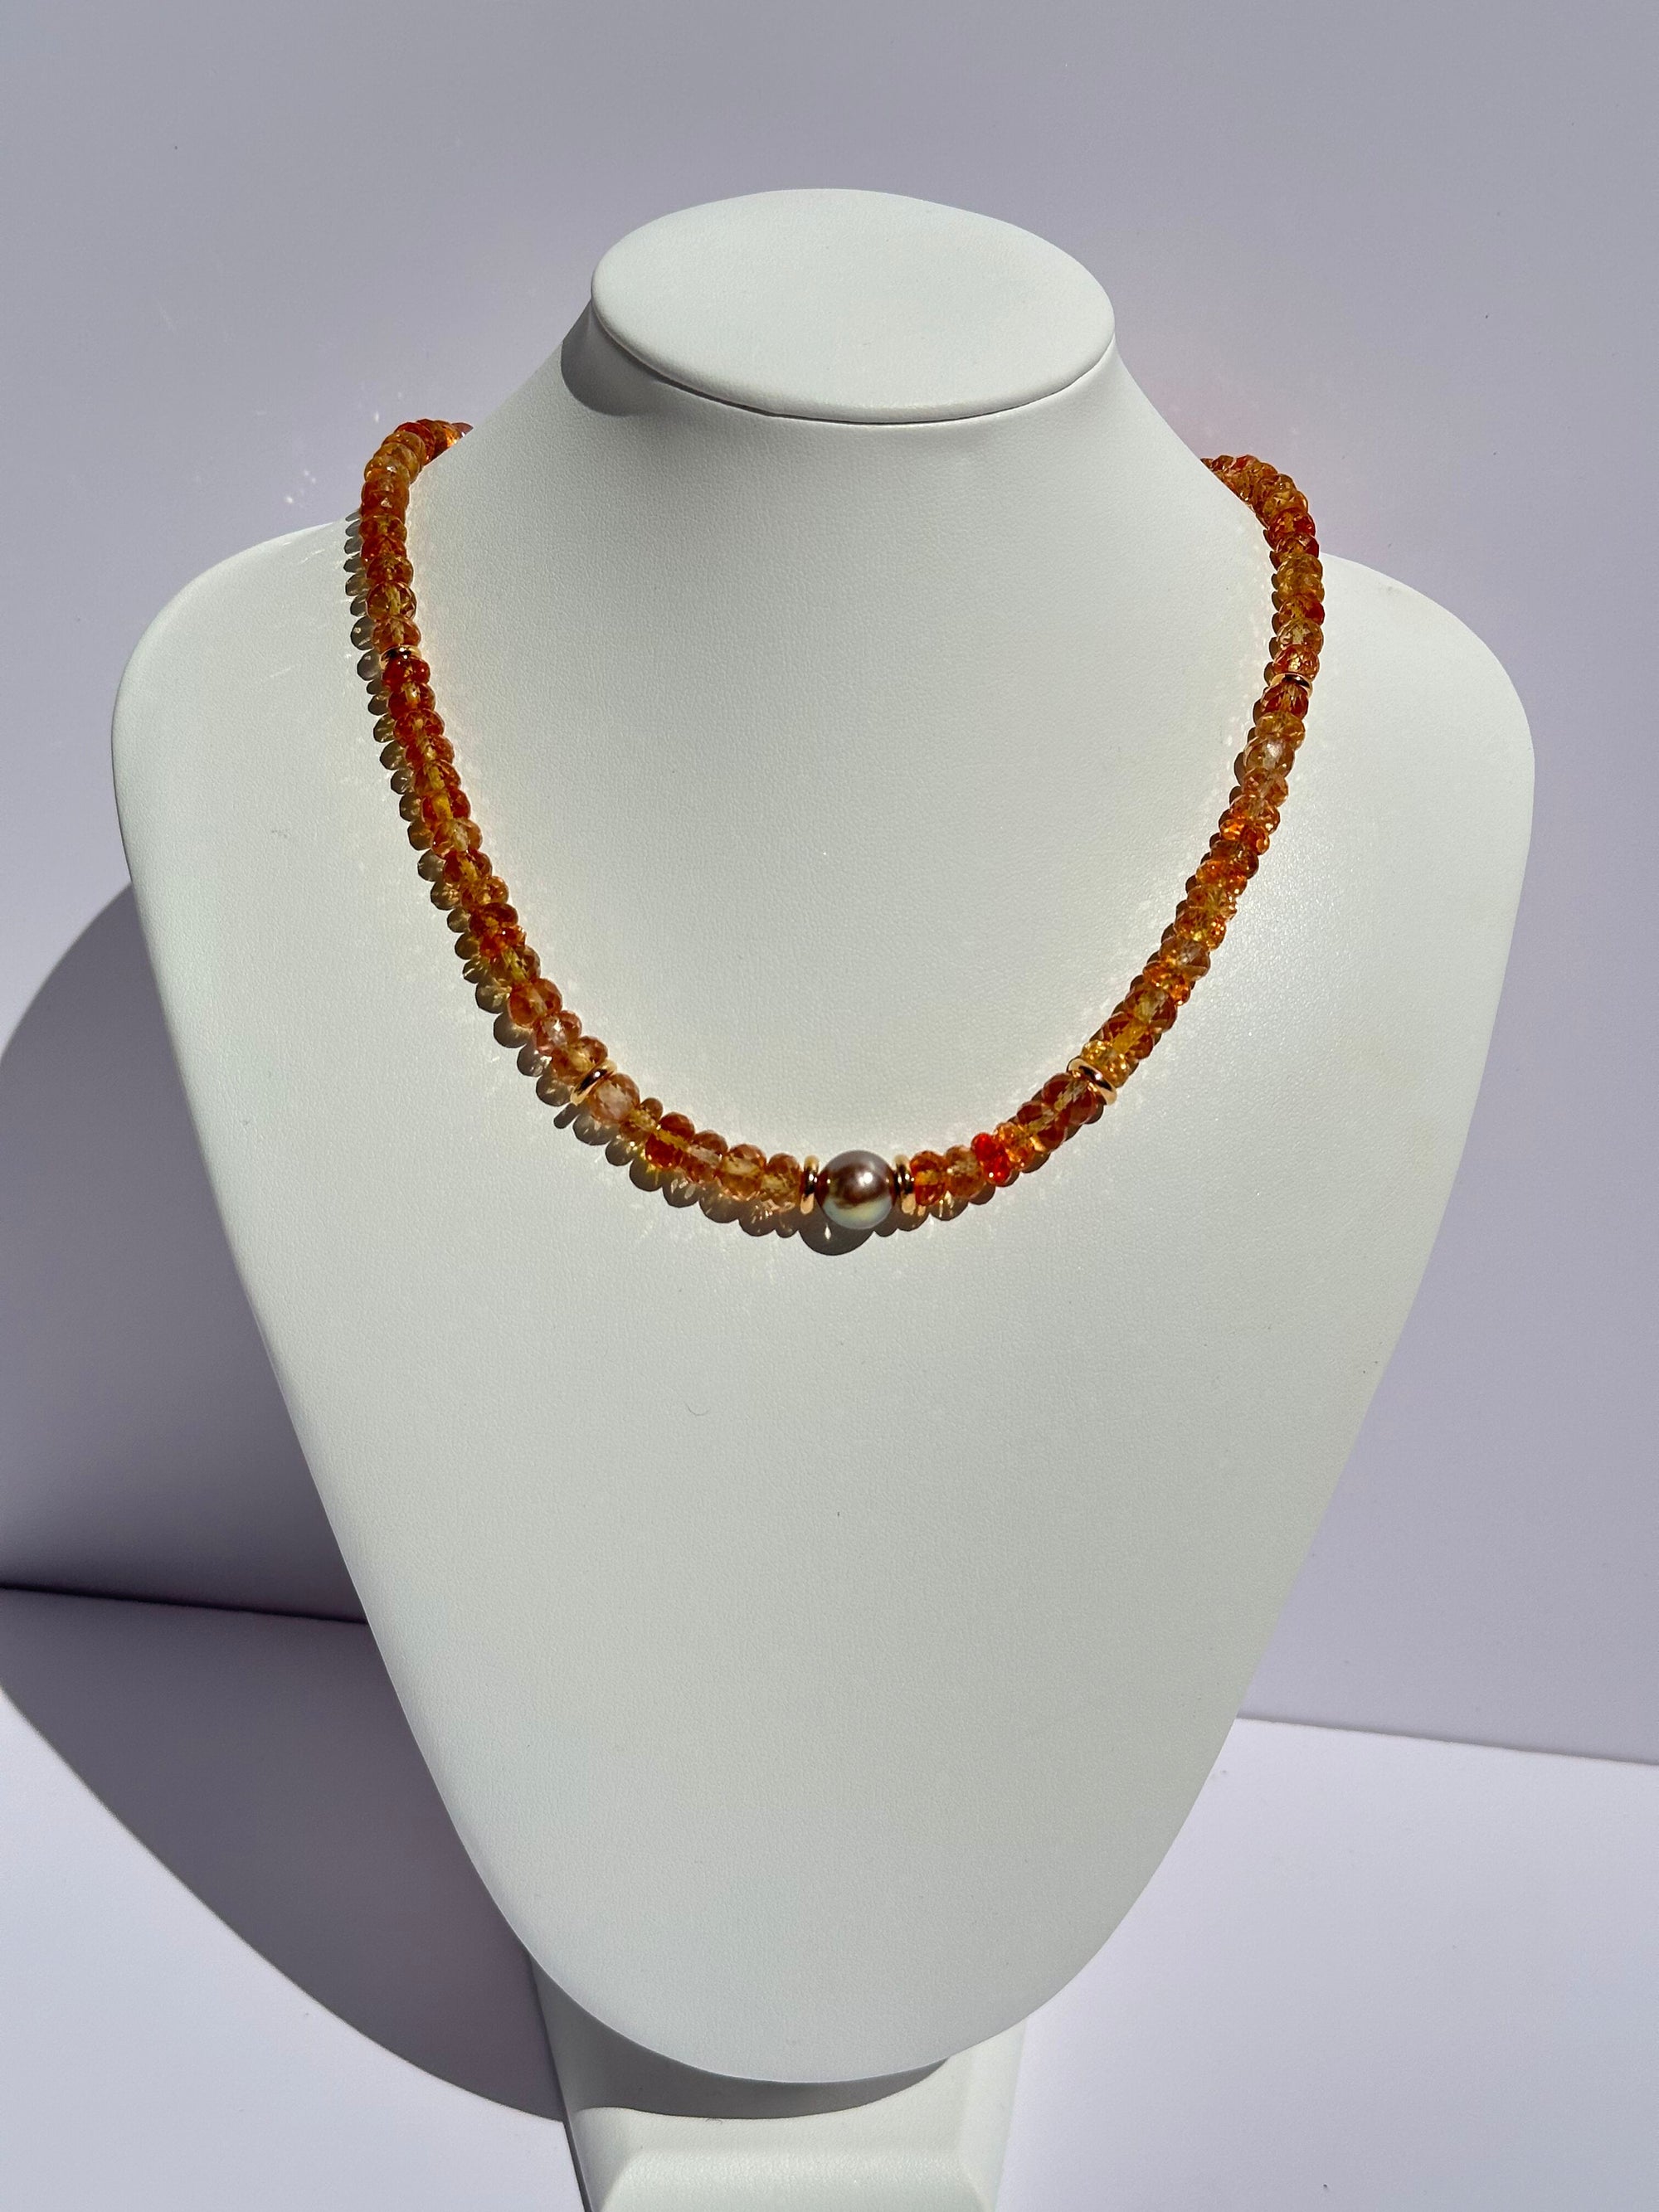 Gorgeous Padparadscha Sapphire Collar Necklace with Premium Edison Pearl & 18K Gold Focal